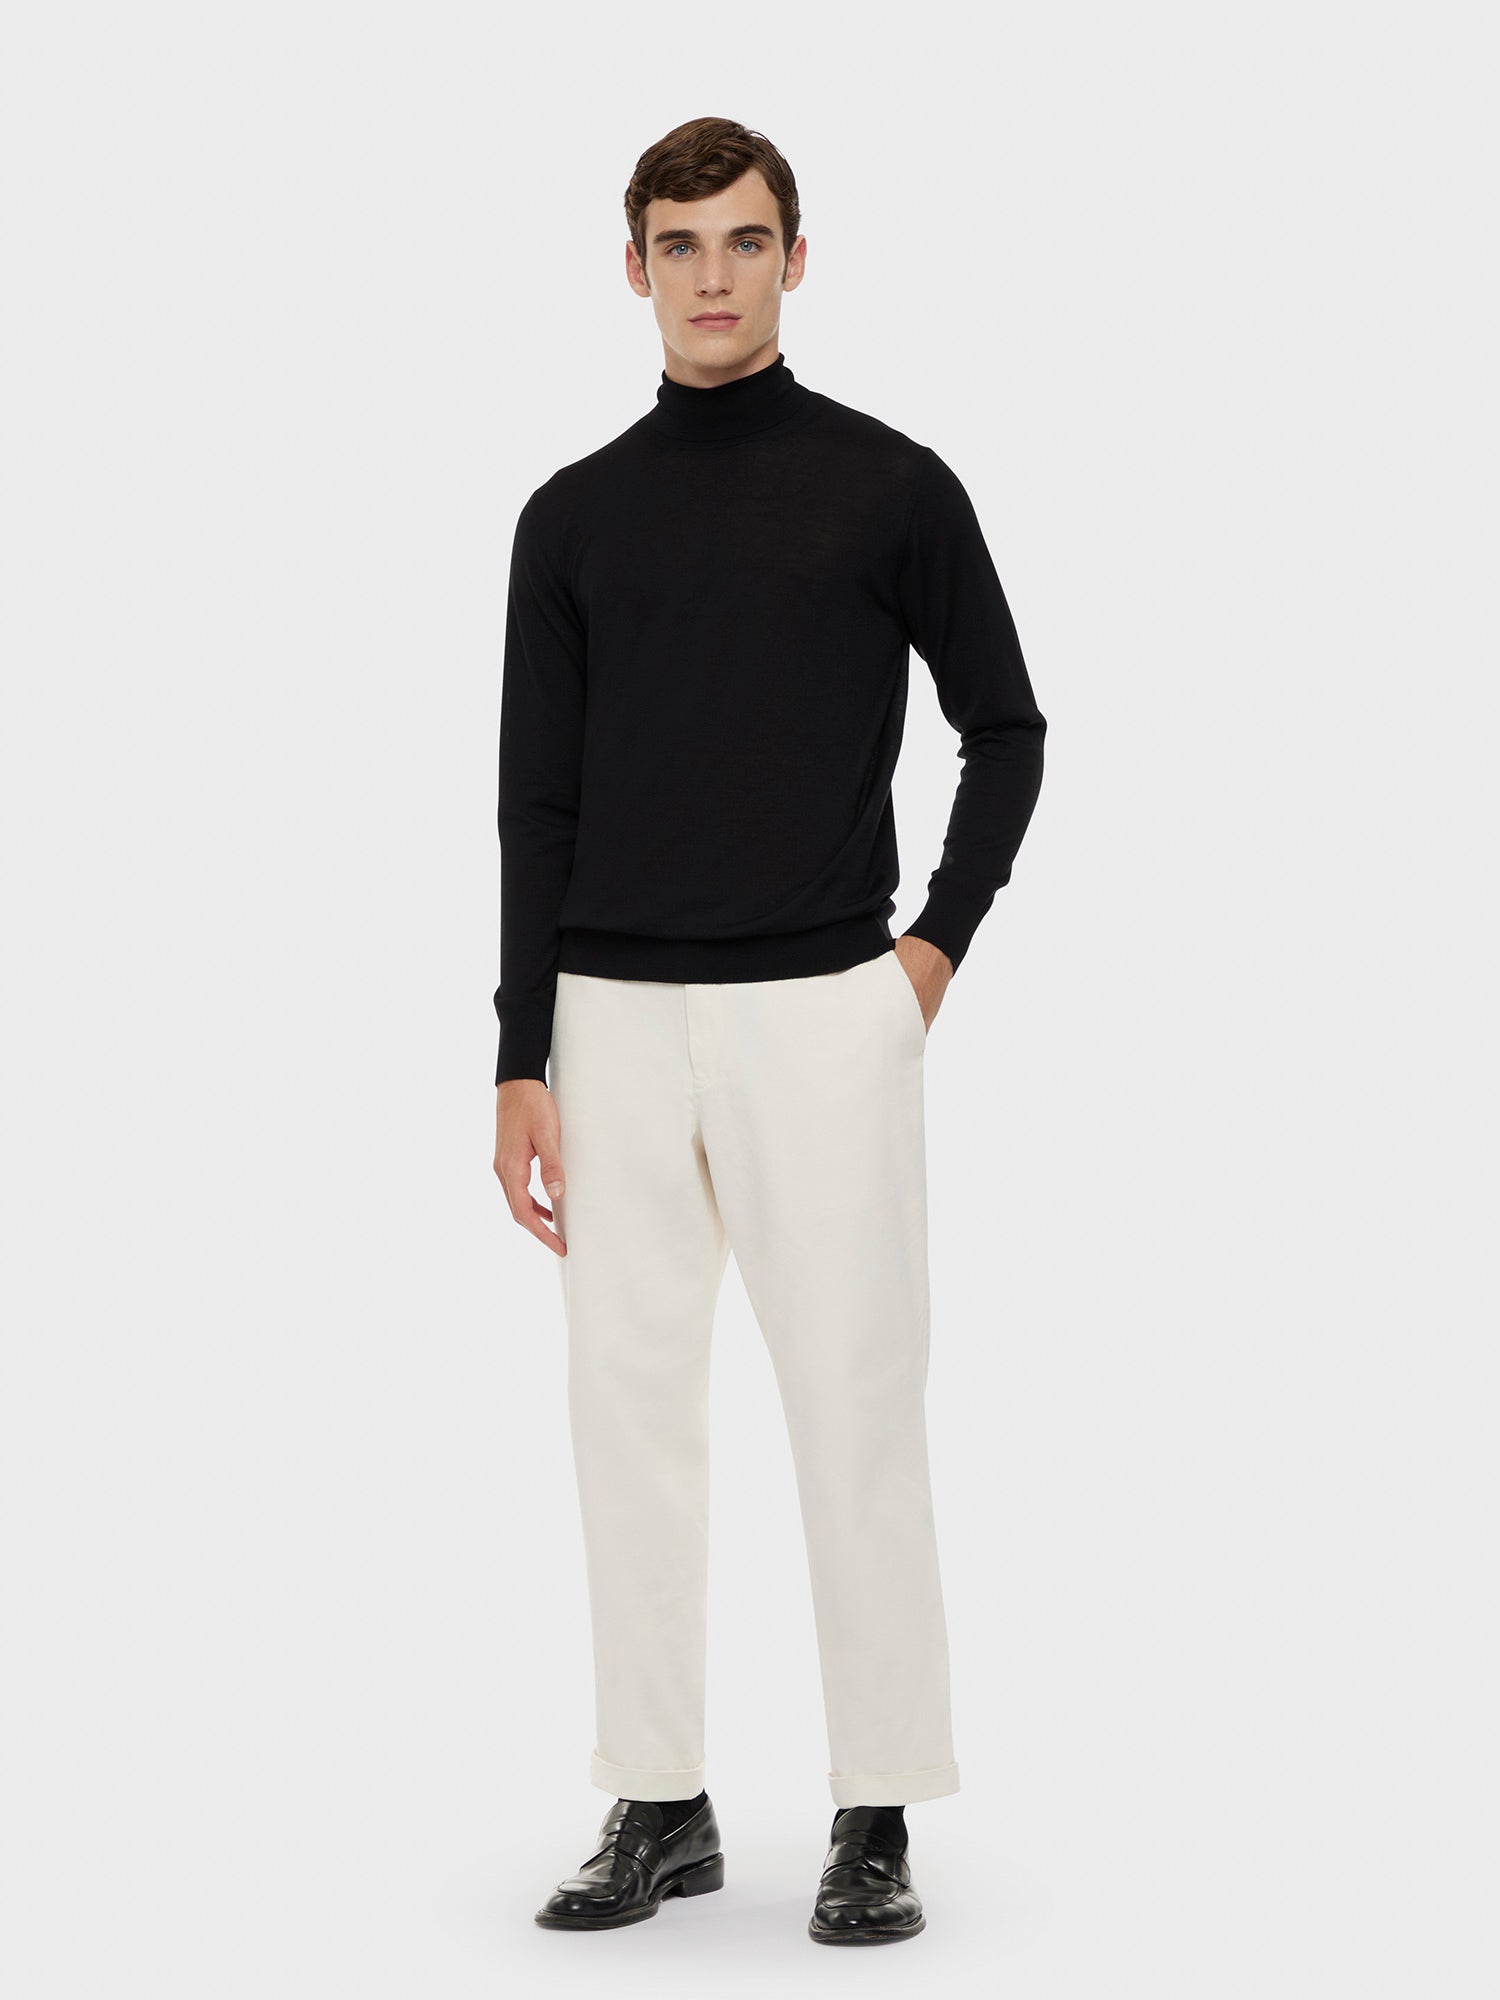 Caruso - Black turtleneck in wool, silk and cashmere